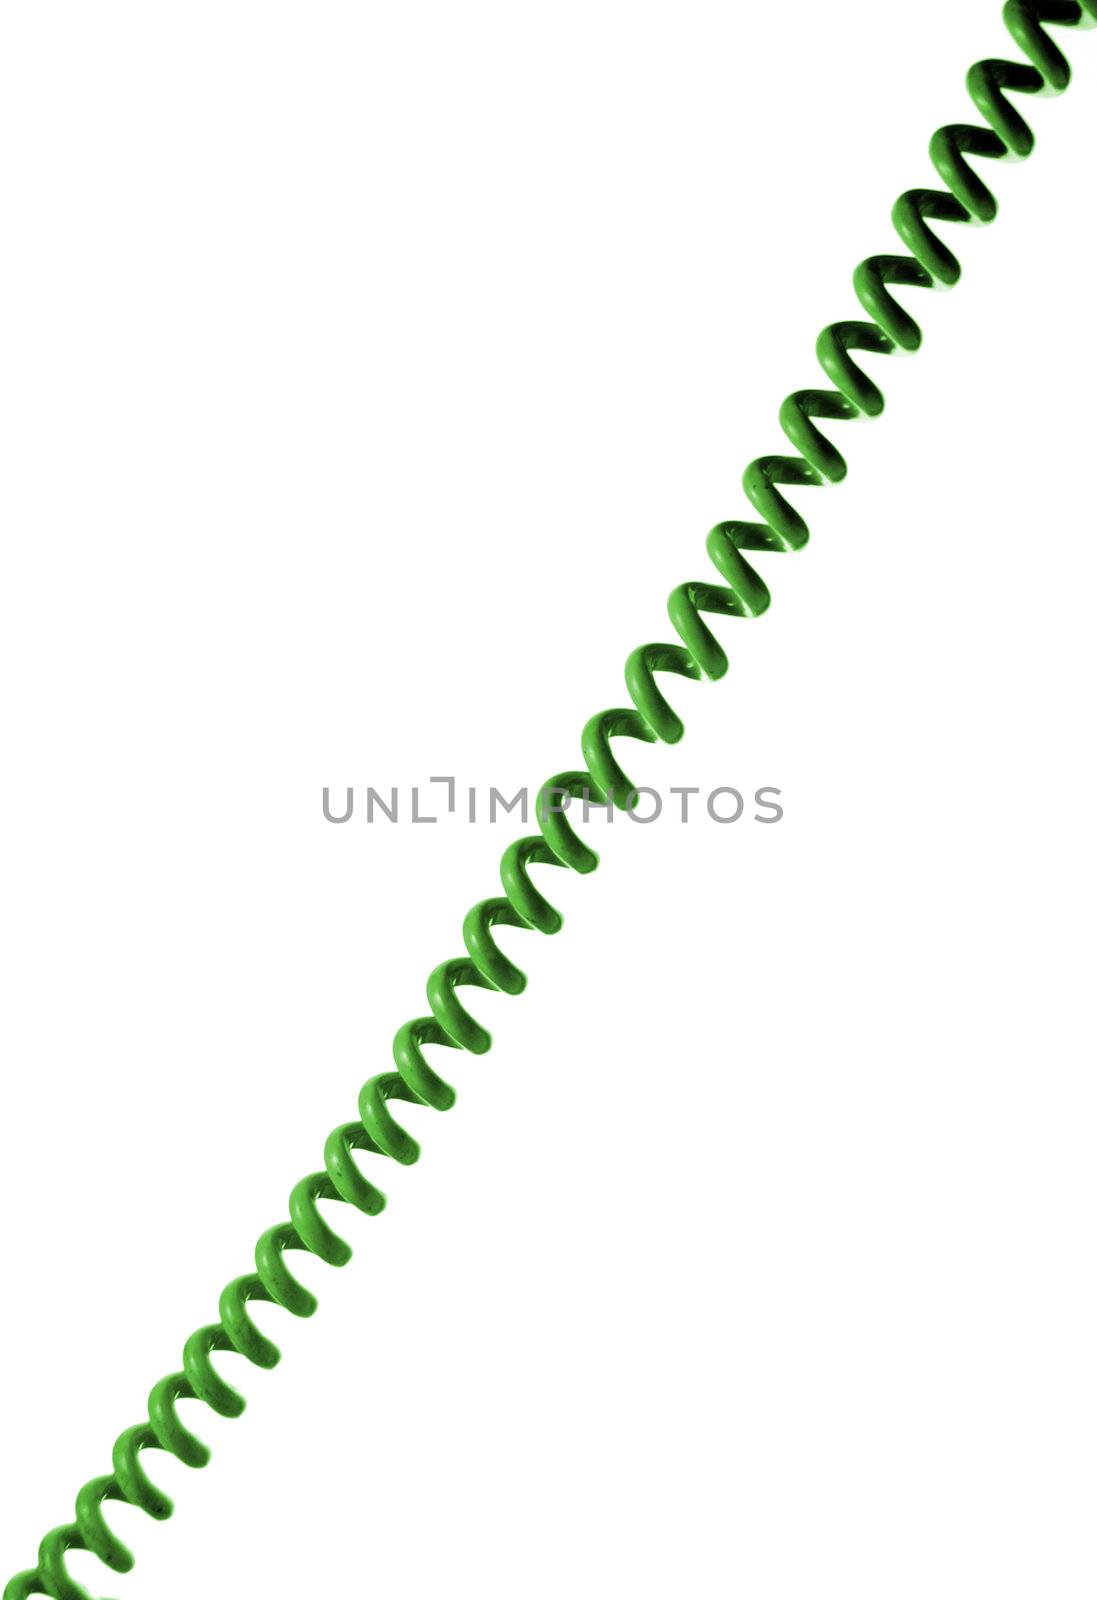 Old style green phone wire isolated on white background